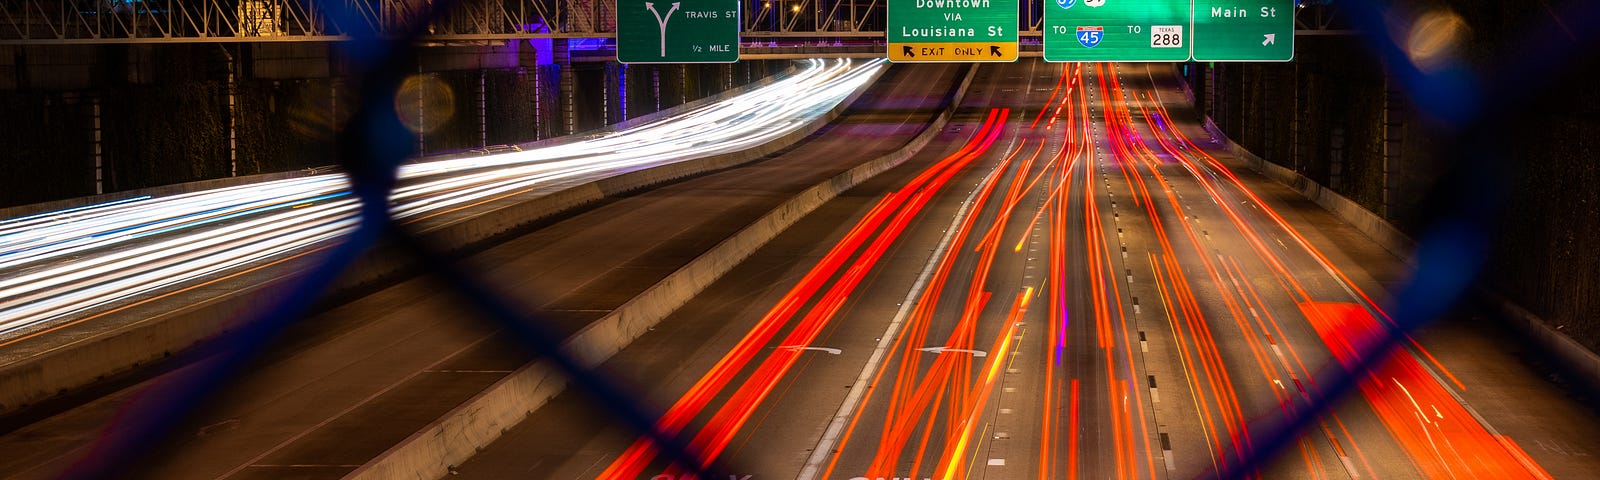 A night timelapse pciture of a freeway in Houston, Texas